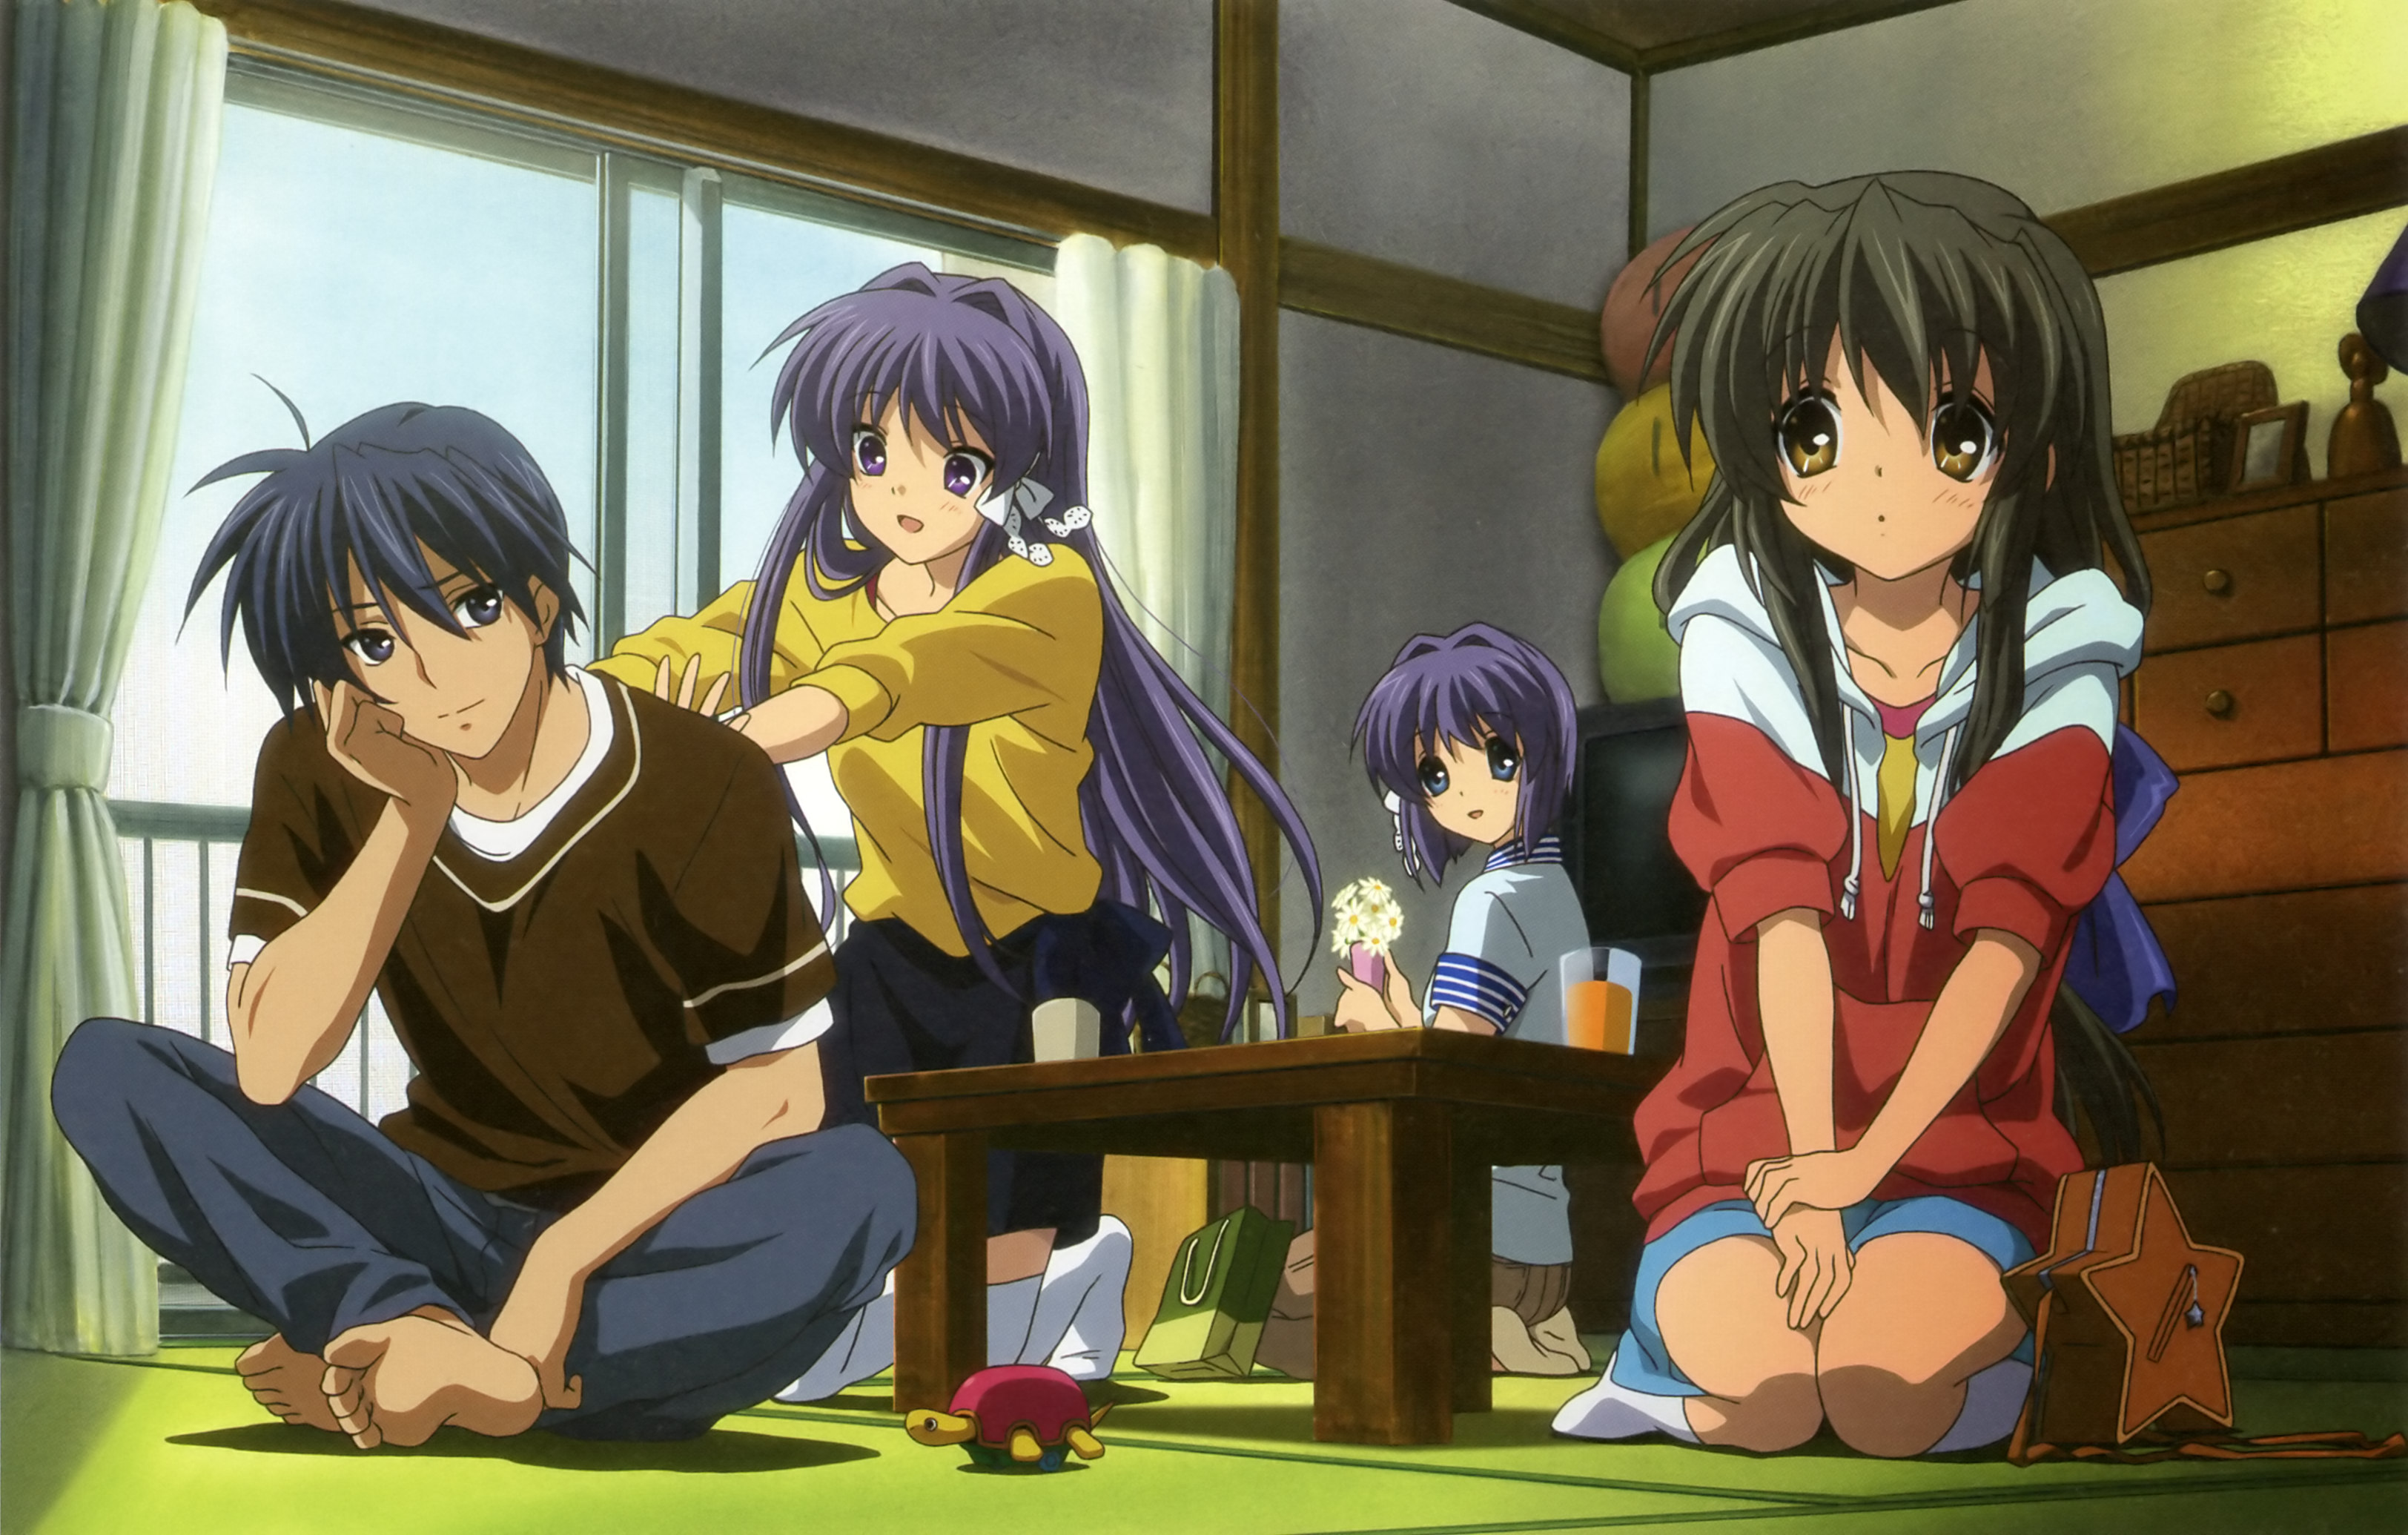 Kyou, Ryou, Fuuko, and Tomoya from the anime Clannad on a colorful desktop wallpaper.